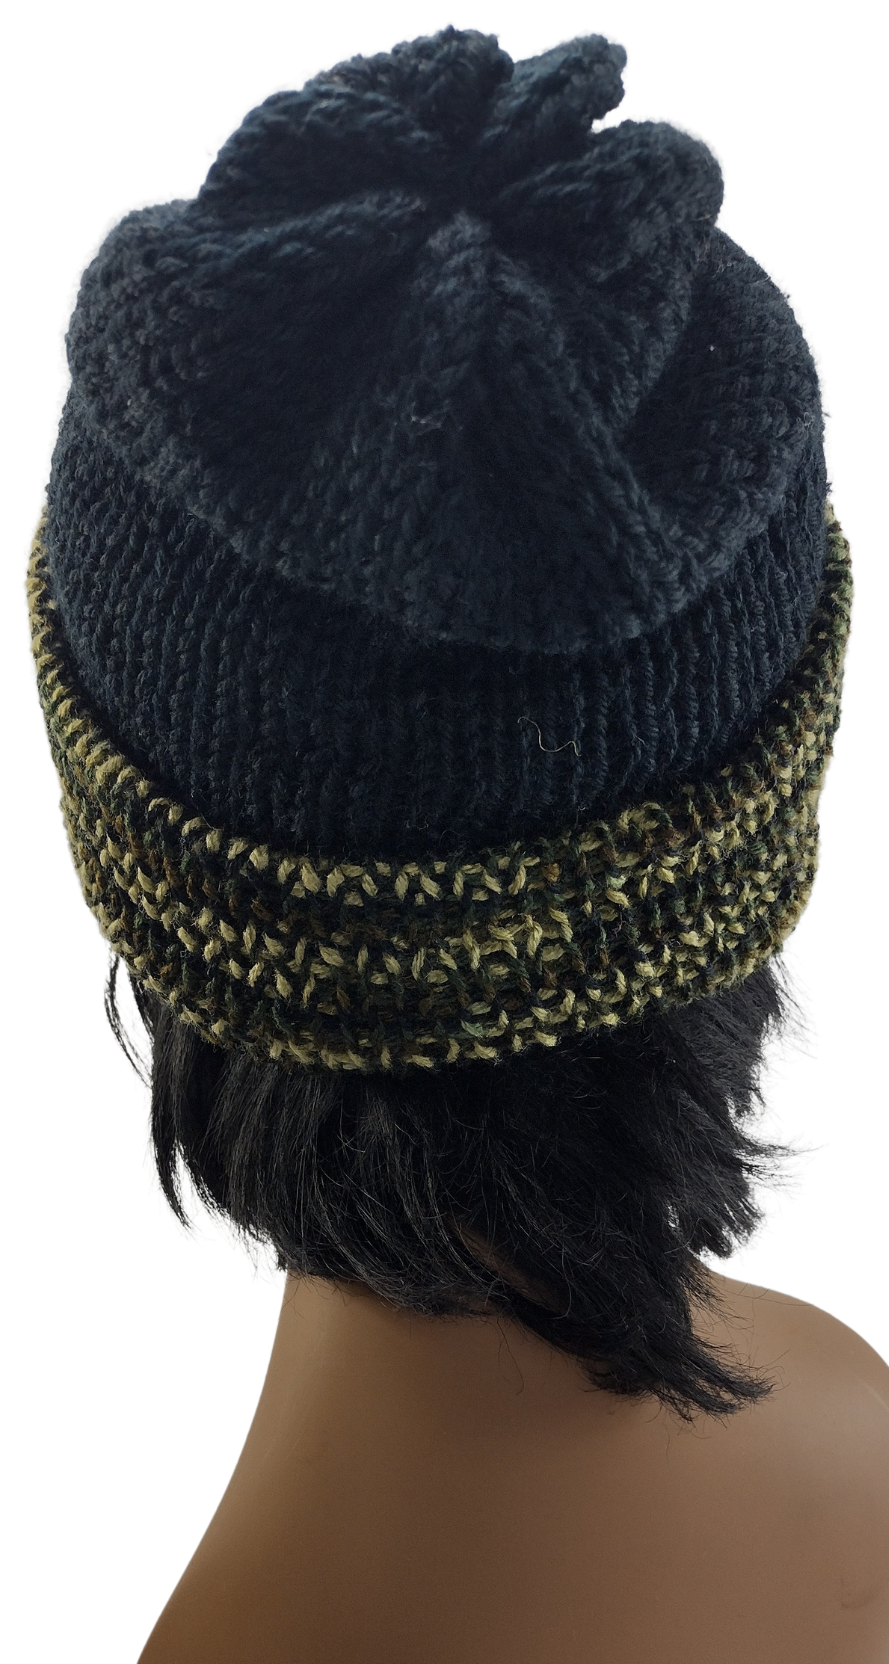 Unisex Slouch Knitted Camouflage and Black Knit Double Layer Fold Over Slouchy Beanie - Unisex - For Men or Women - Ready to Ship